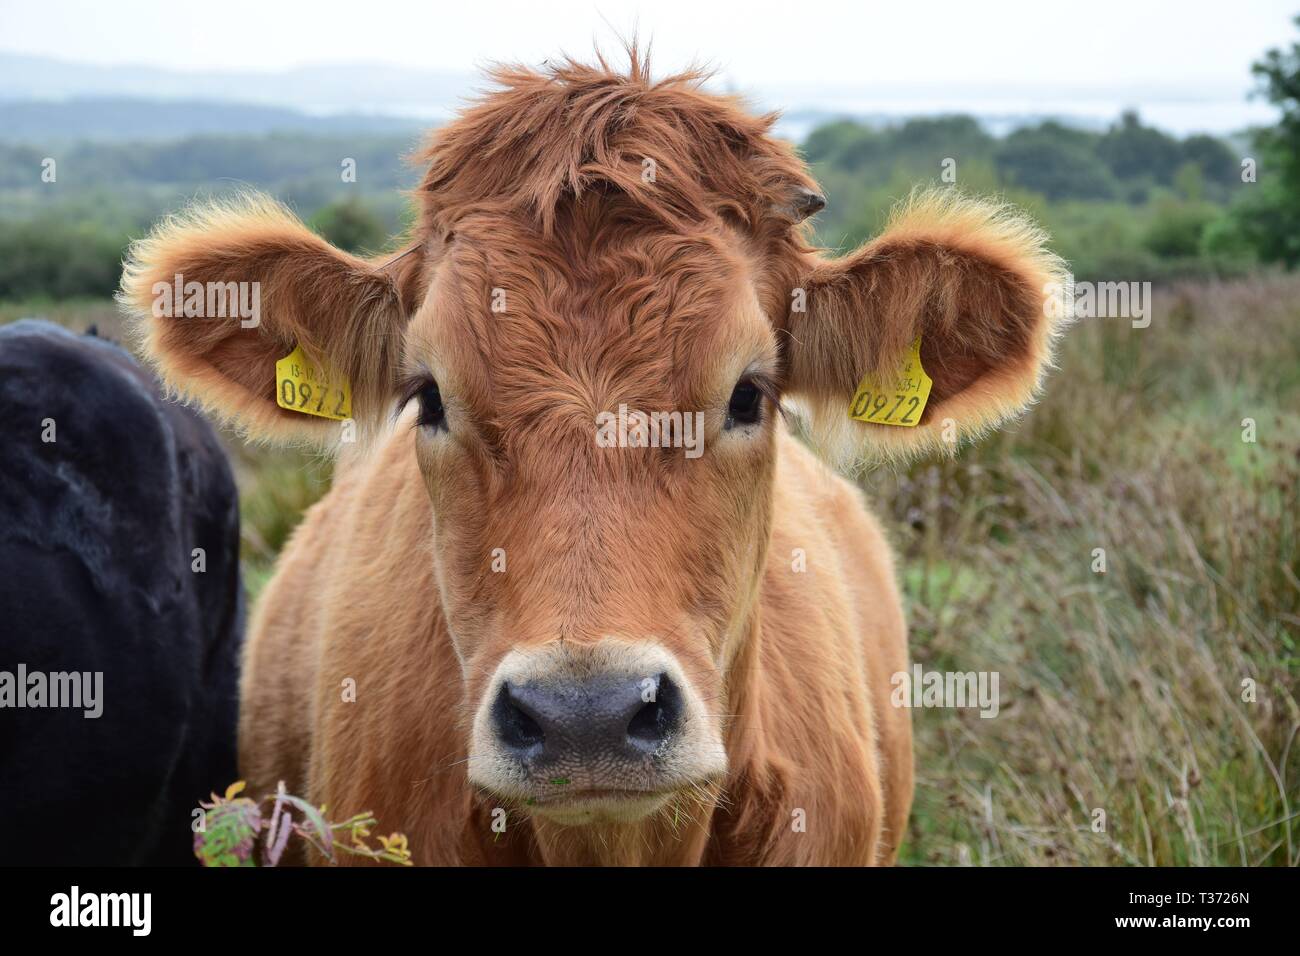 Portrait of a brown cattle on a meadow in Ireland. Landscape in the background. Stock Photo